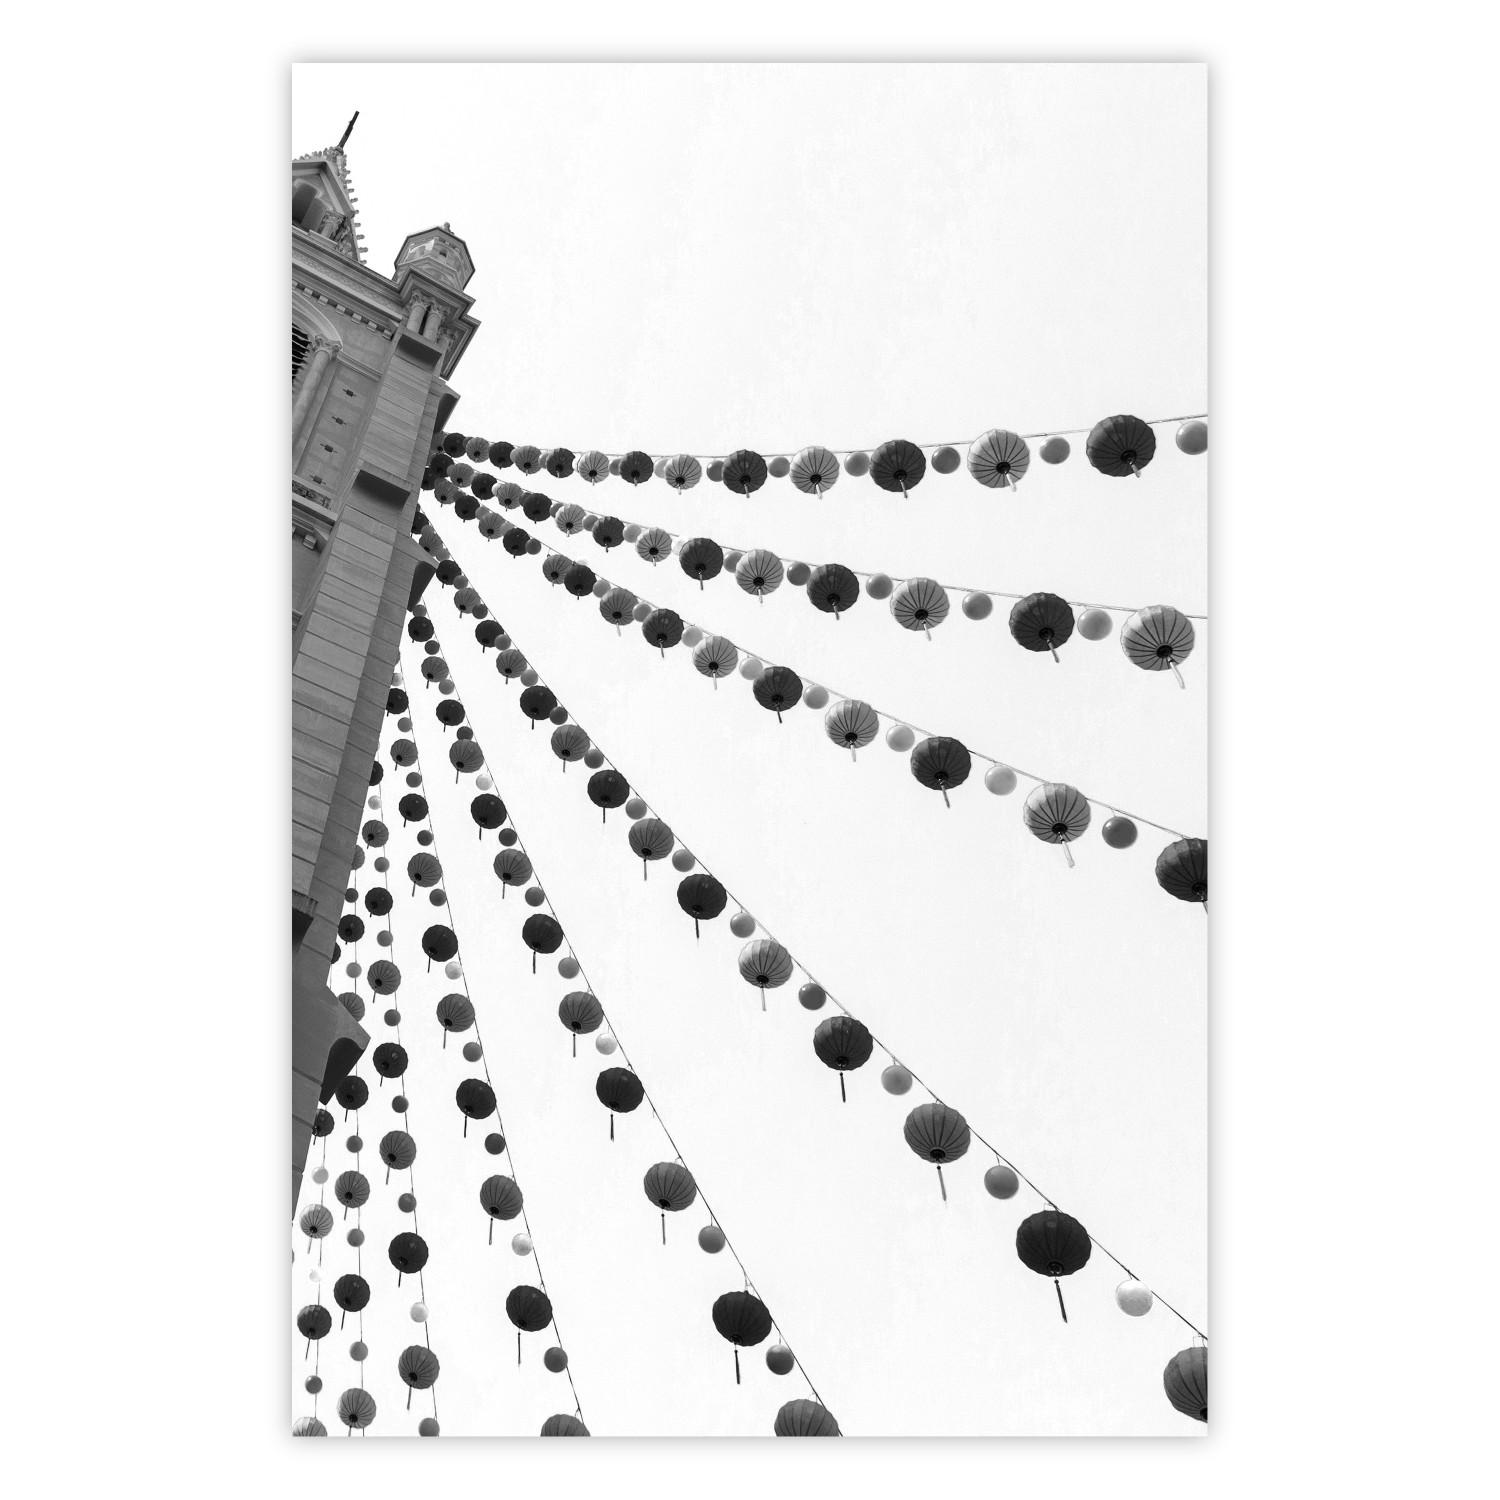 Poster Joyful Fair - gray architecture of a building with hanging decorations